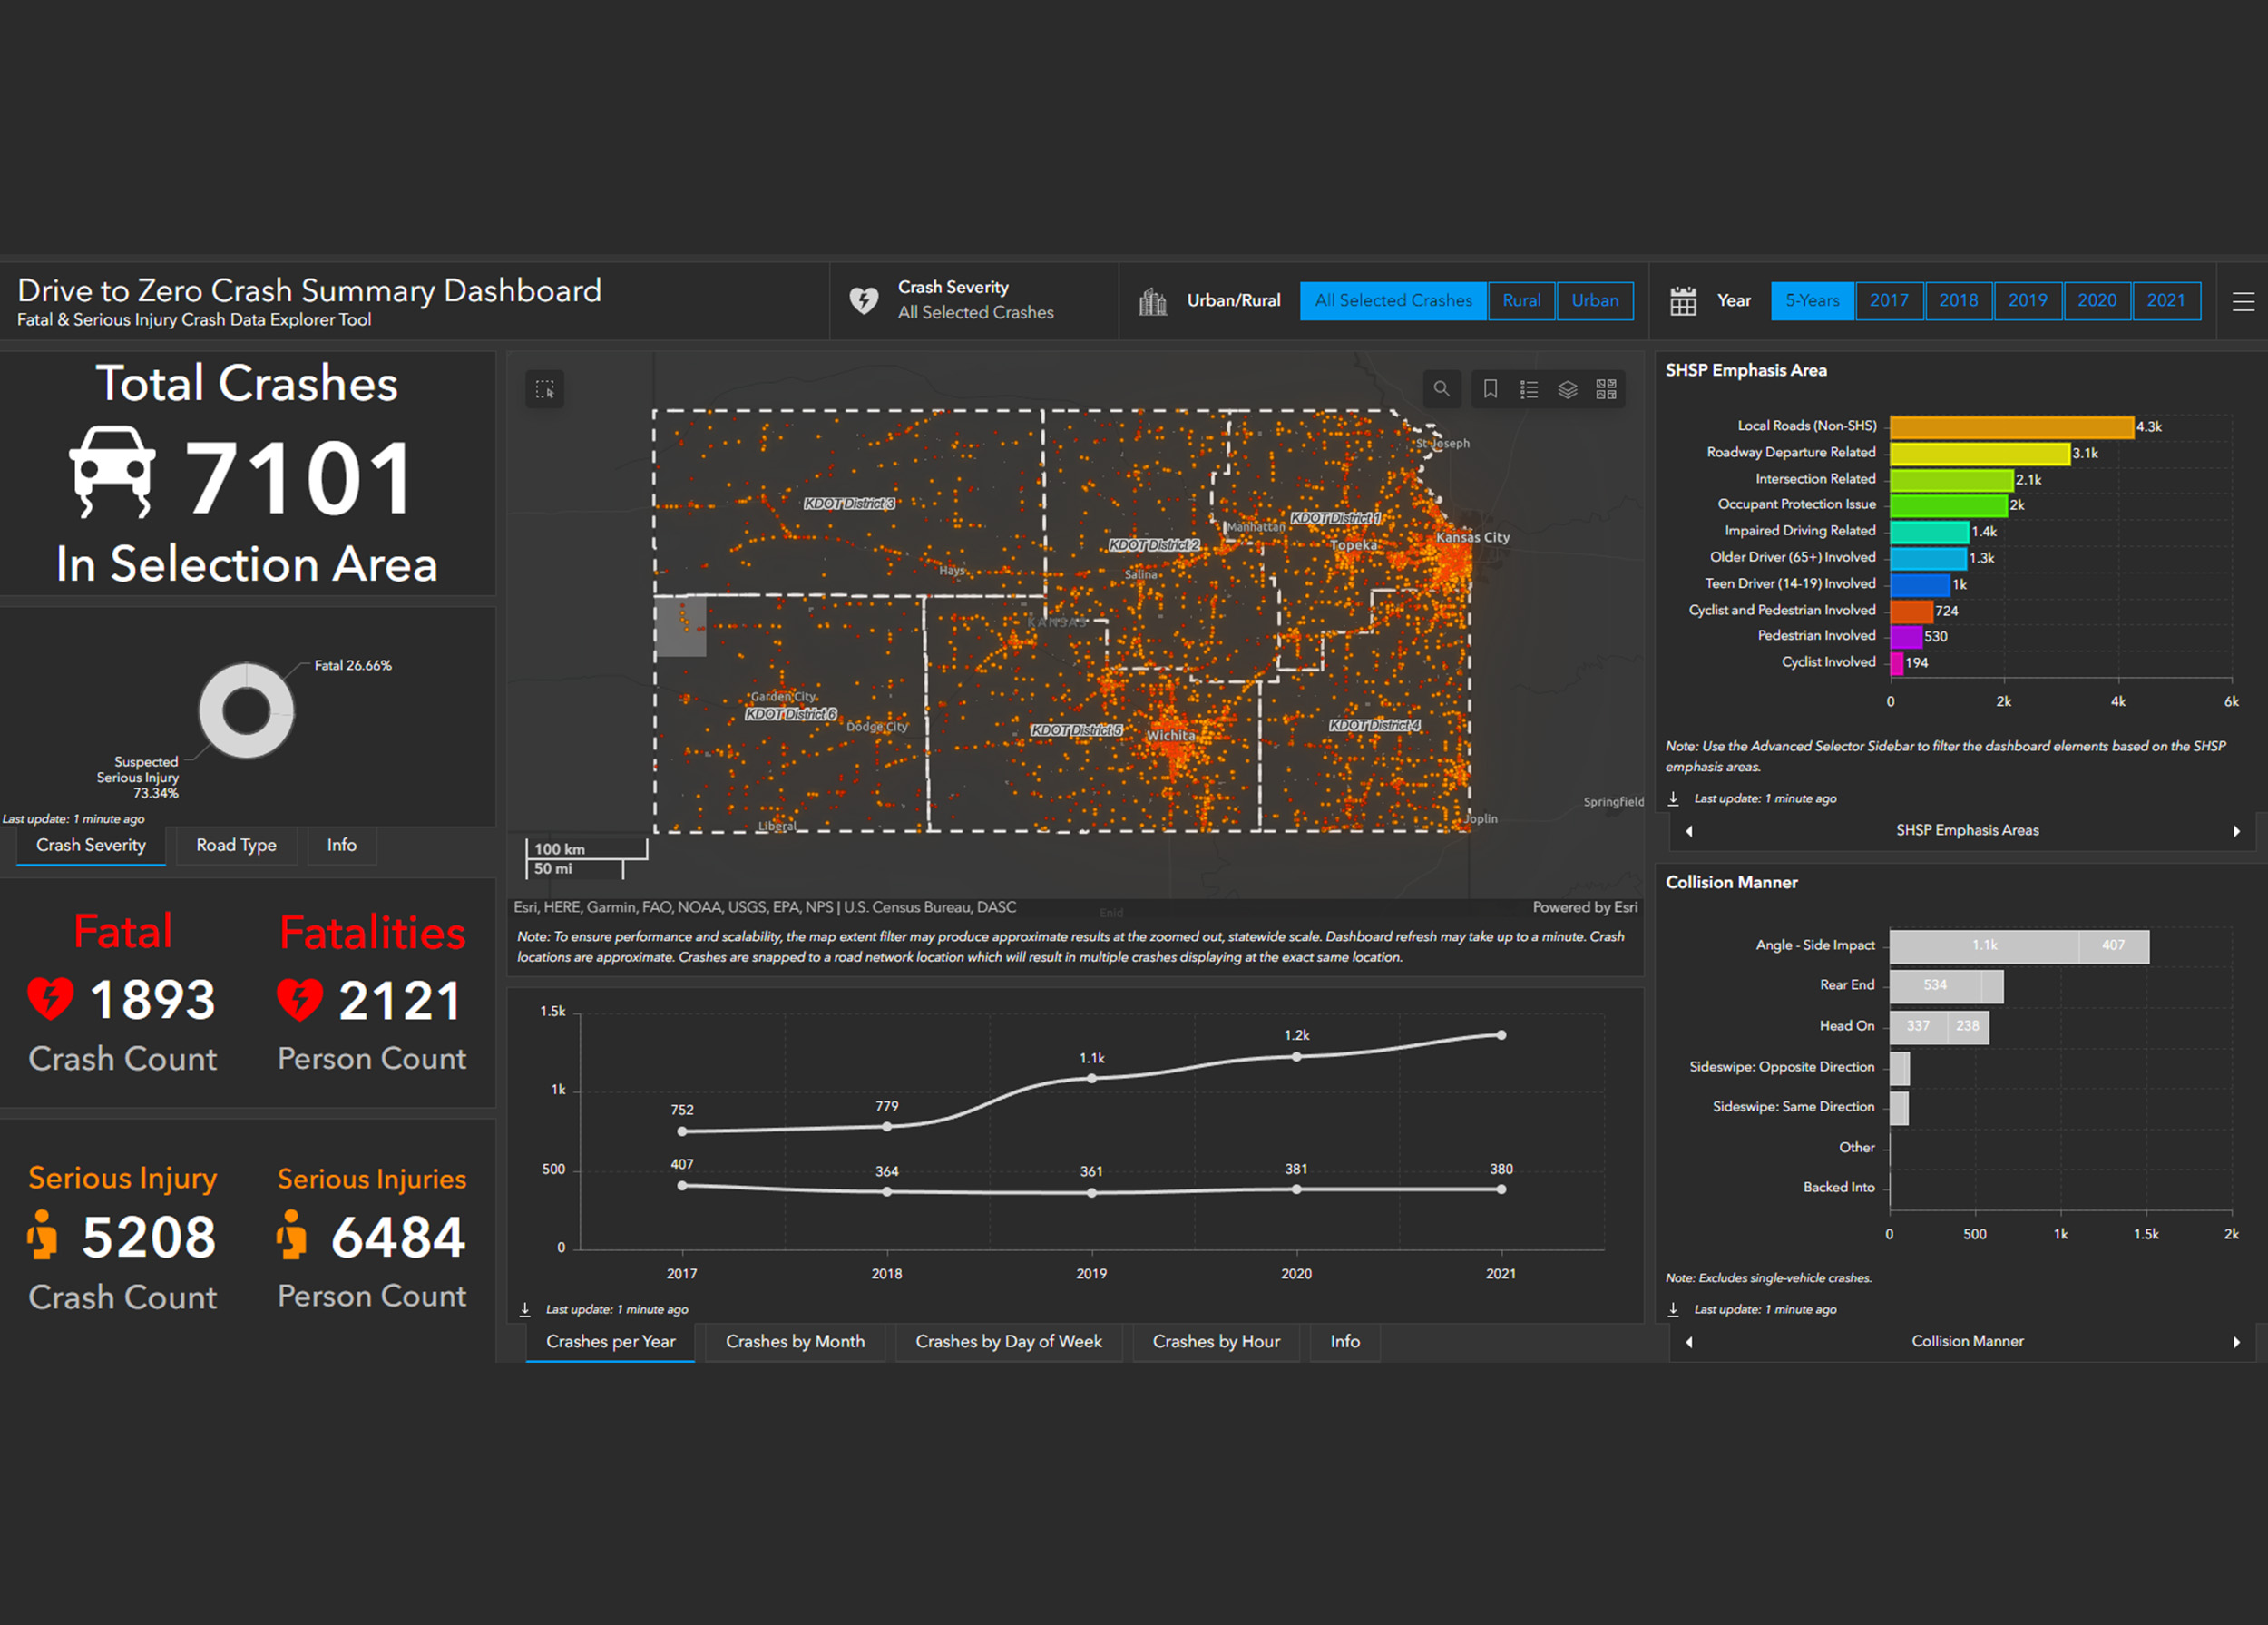 This interactive dashboard created by Wilson & Company visualizes fatal and severe injury crash data from 2016-2021.